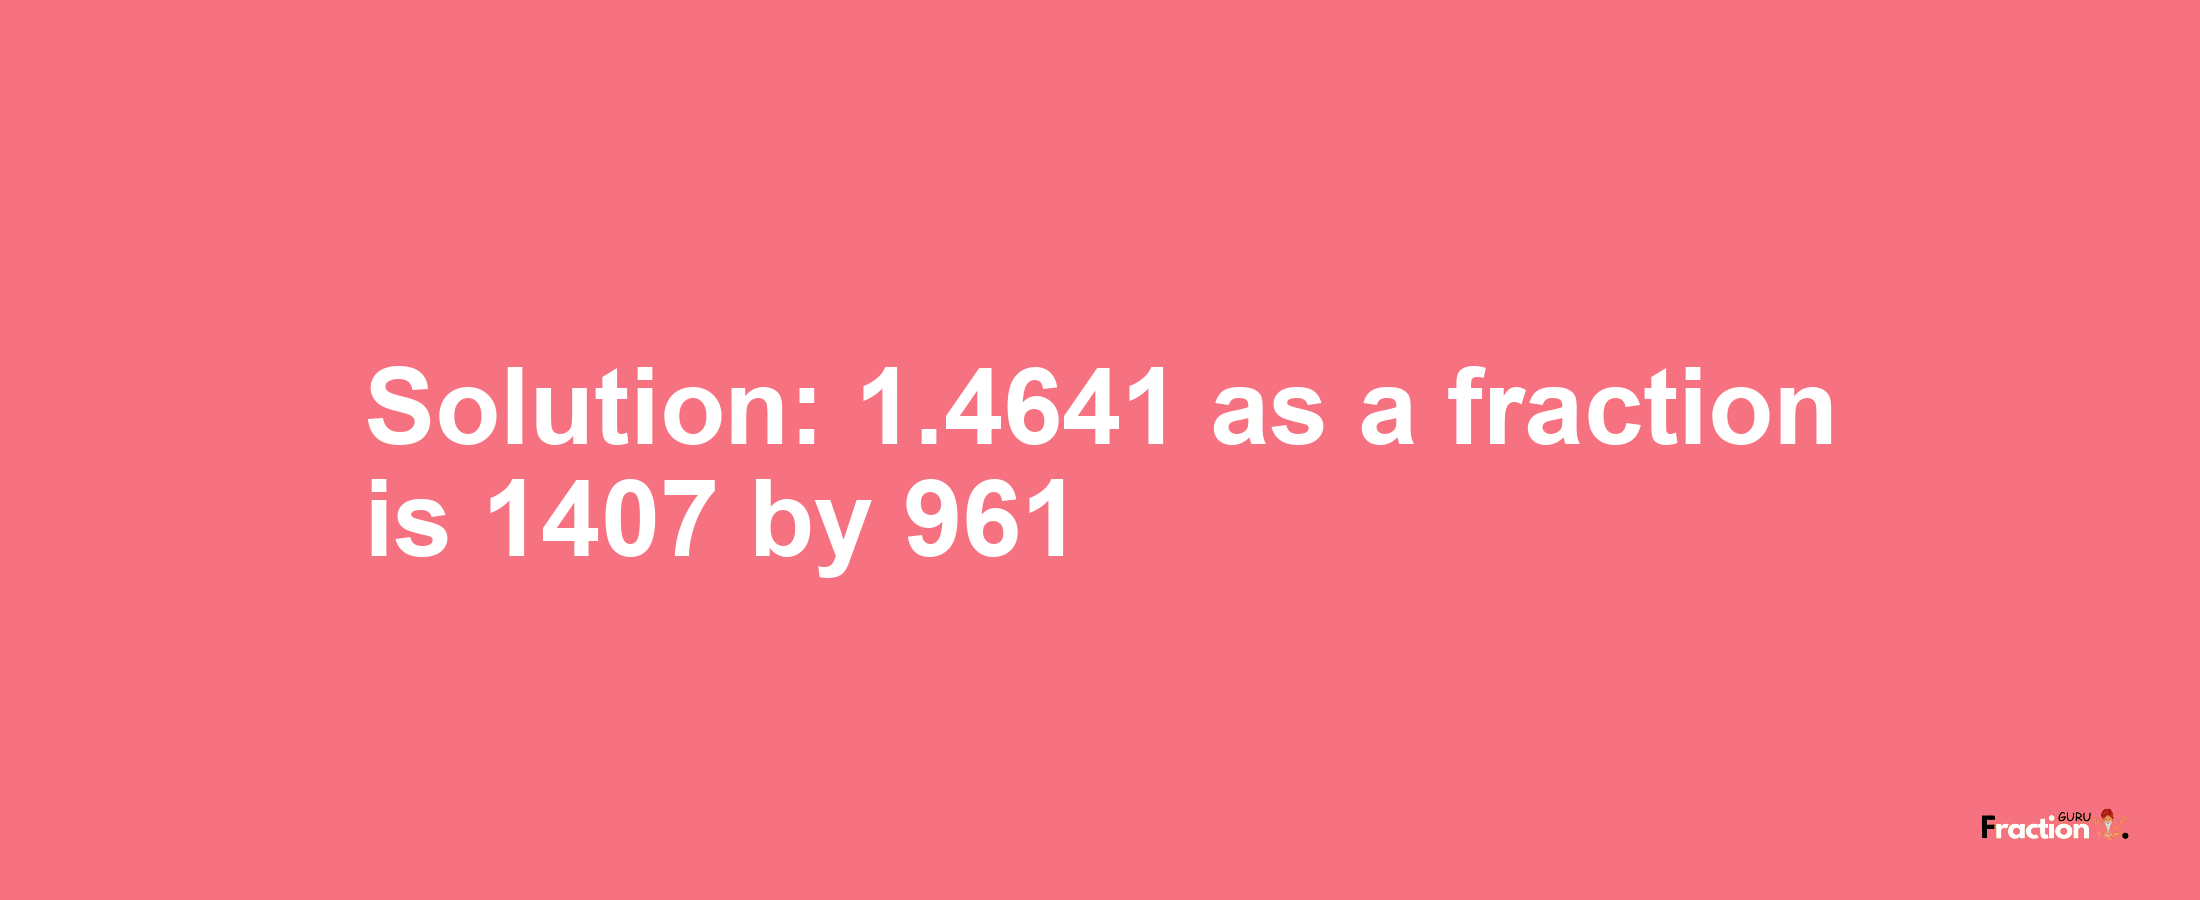 Solution:1.4641 as a fraction is 1407/961